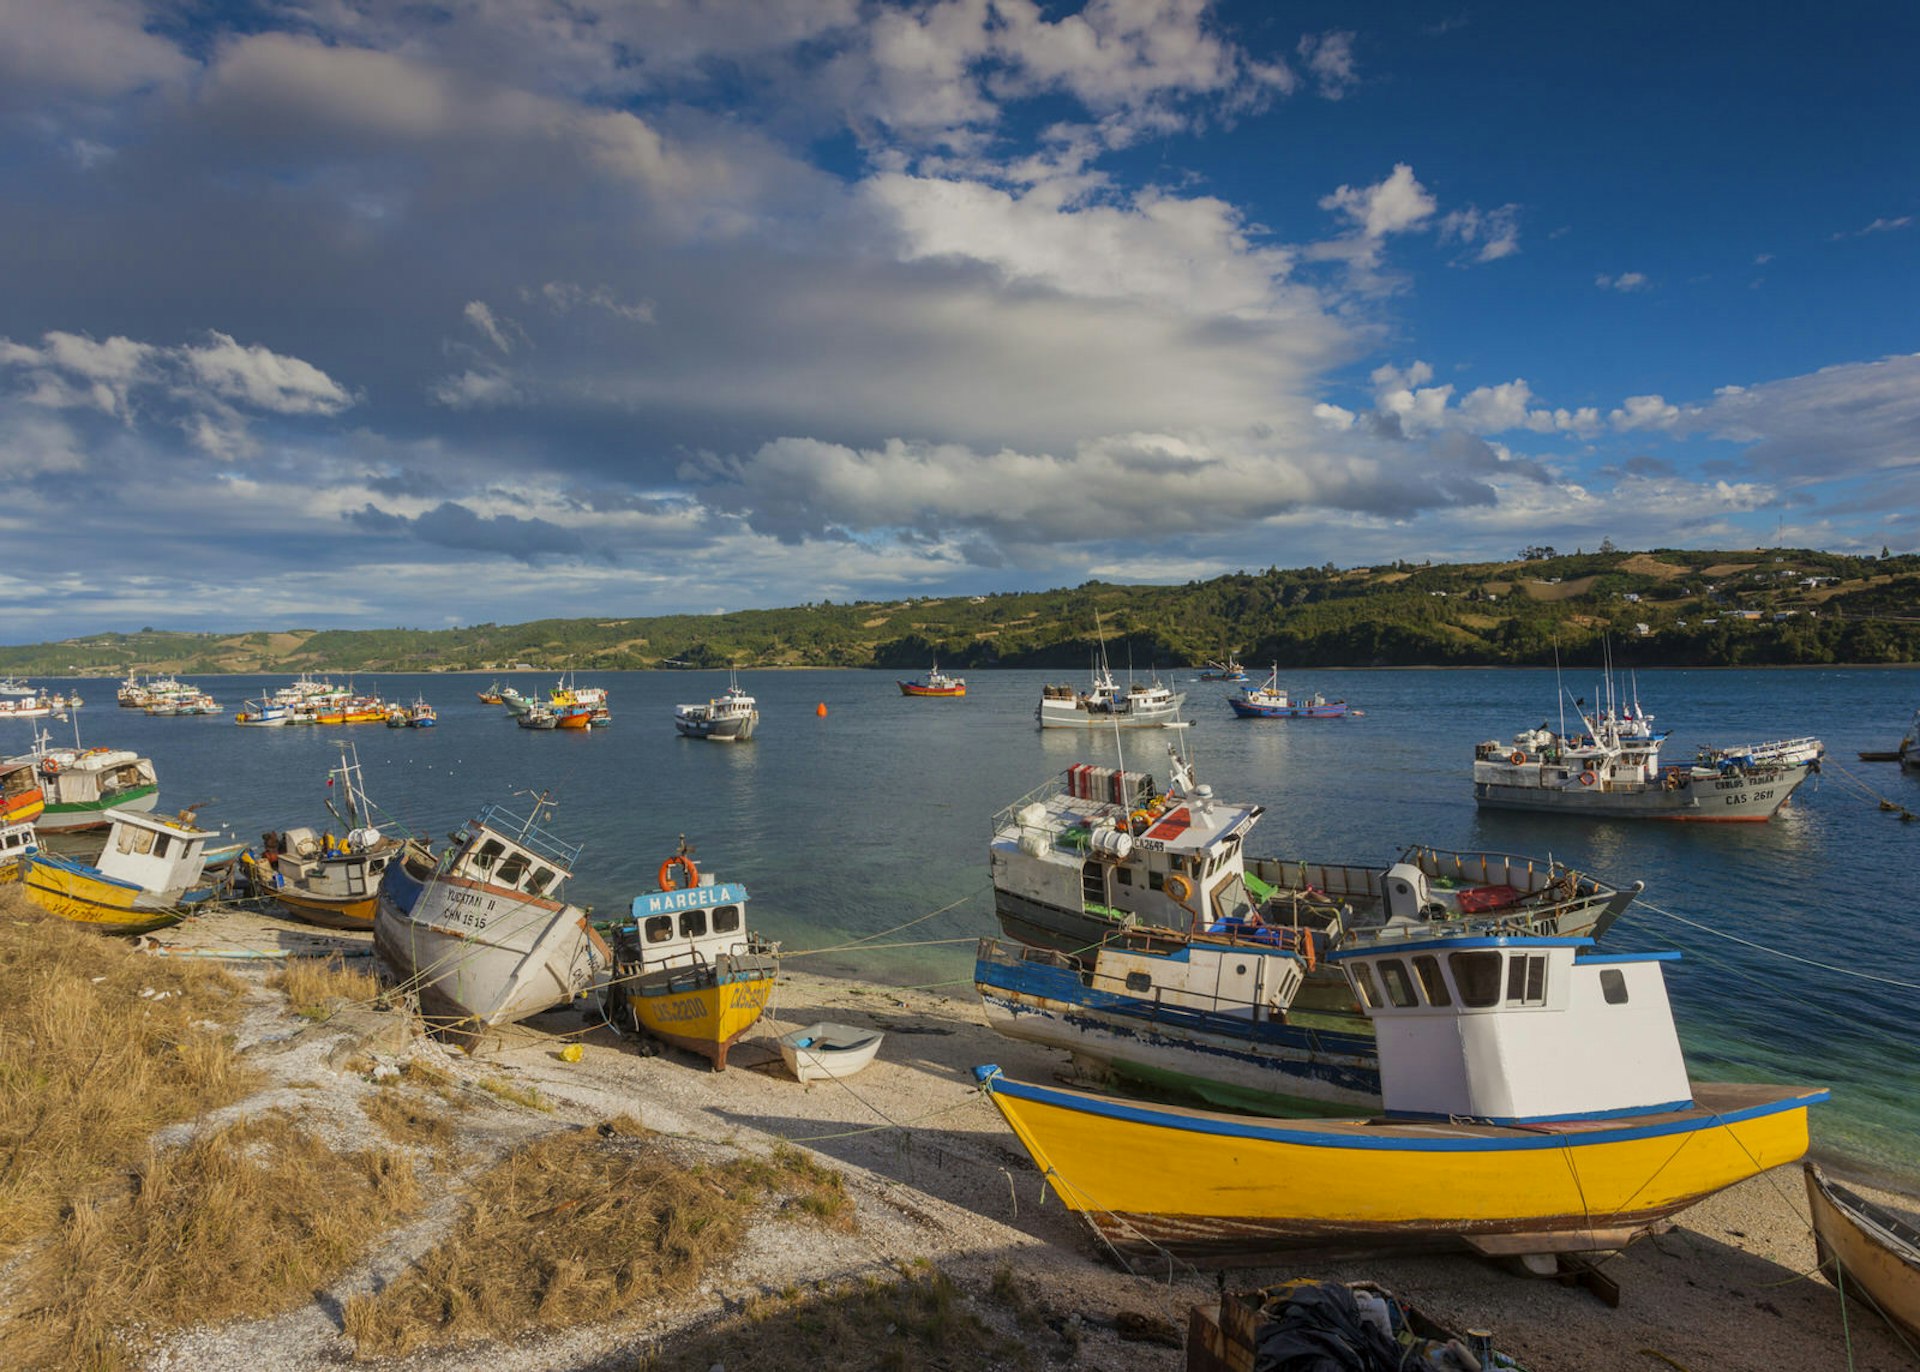 Fishing boats off the coast of Chiloe © Walter Bibikow / Getty Images